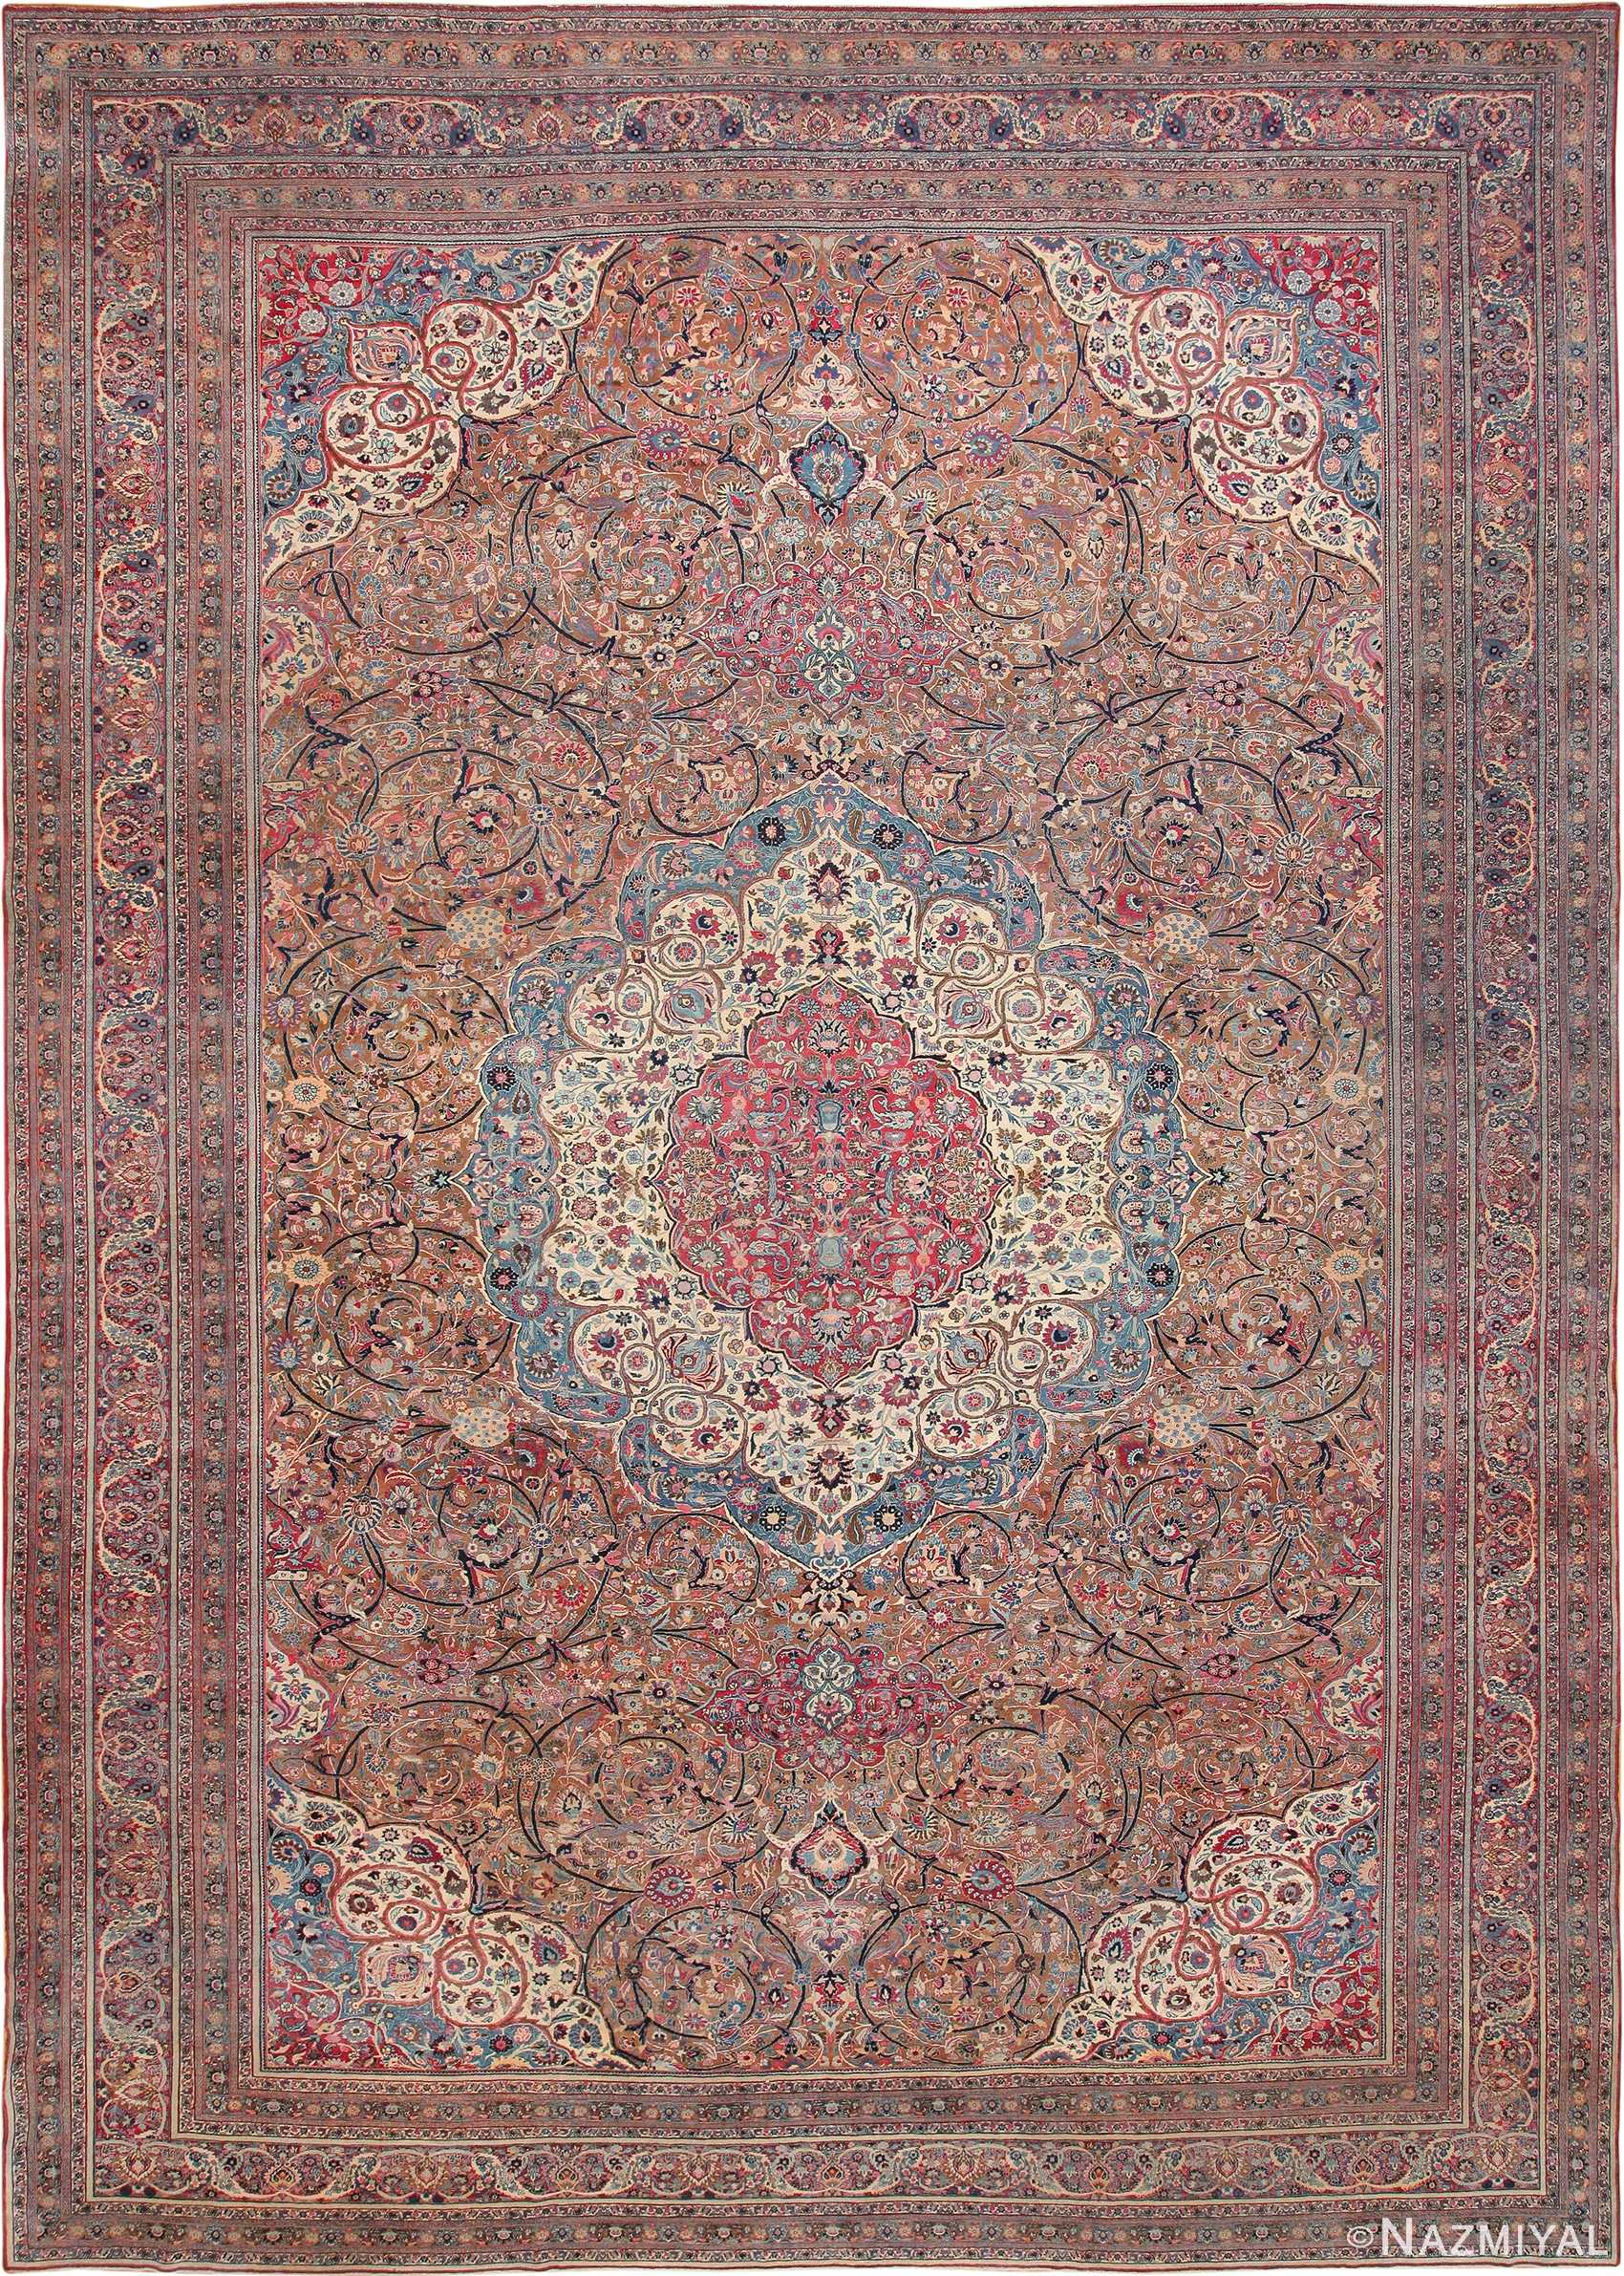 Extremely Fine Large Antique Persian Khorassan Area Rug #49694 by Nazmiyal Antique Rugs